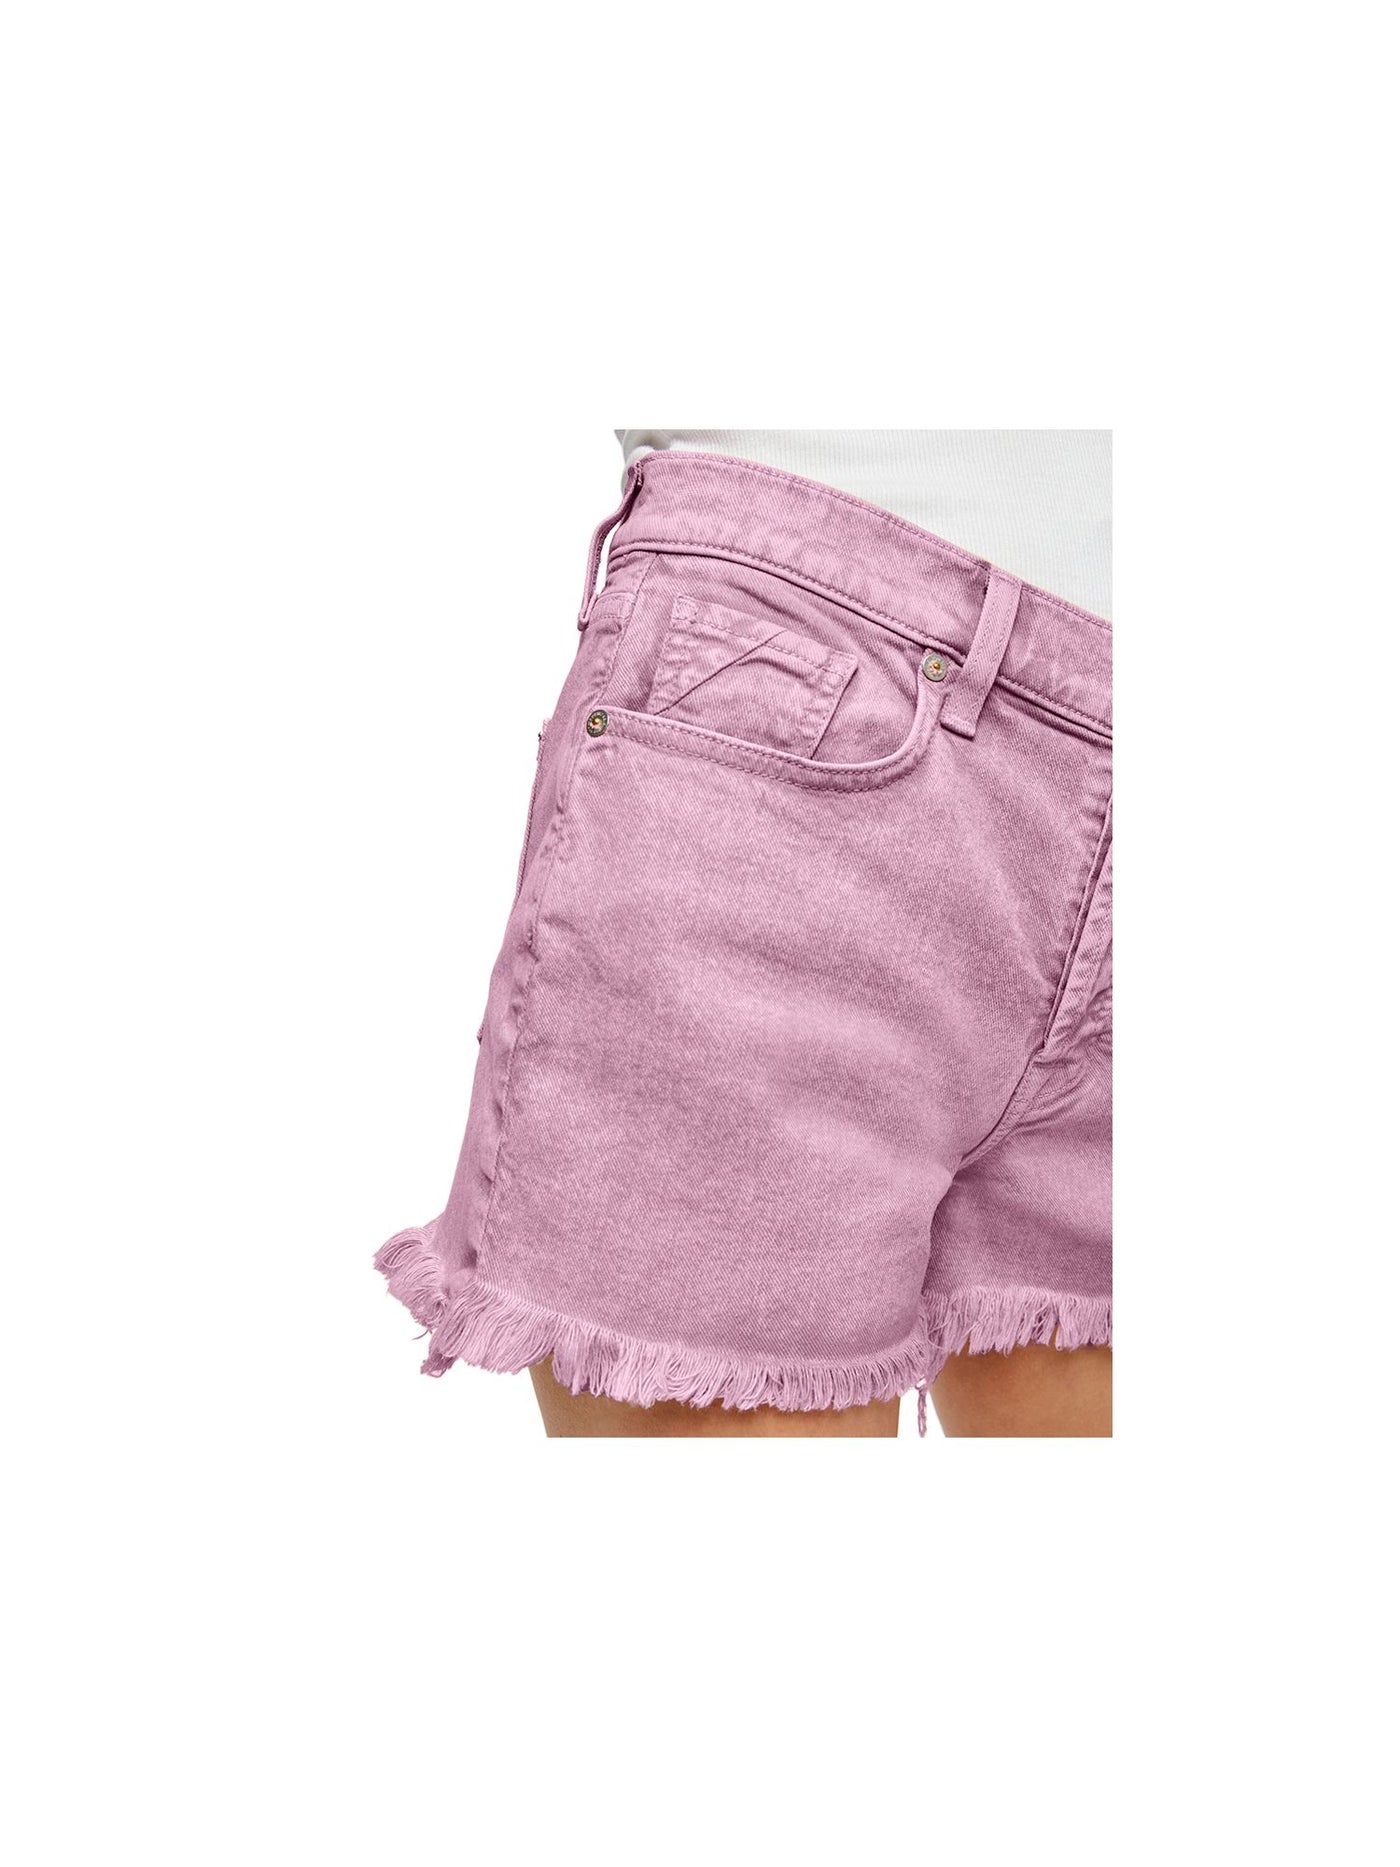 7 FOR ALL MANKIND Womens Pink Zippered Pocketed Frayed Tie Dye Straight leg Shorts Juniors 29